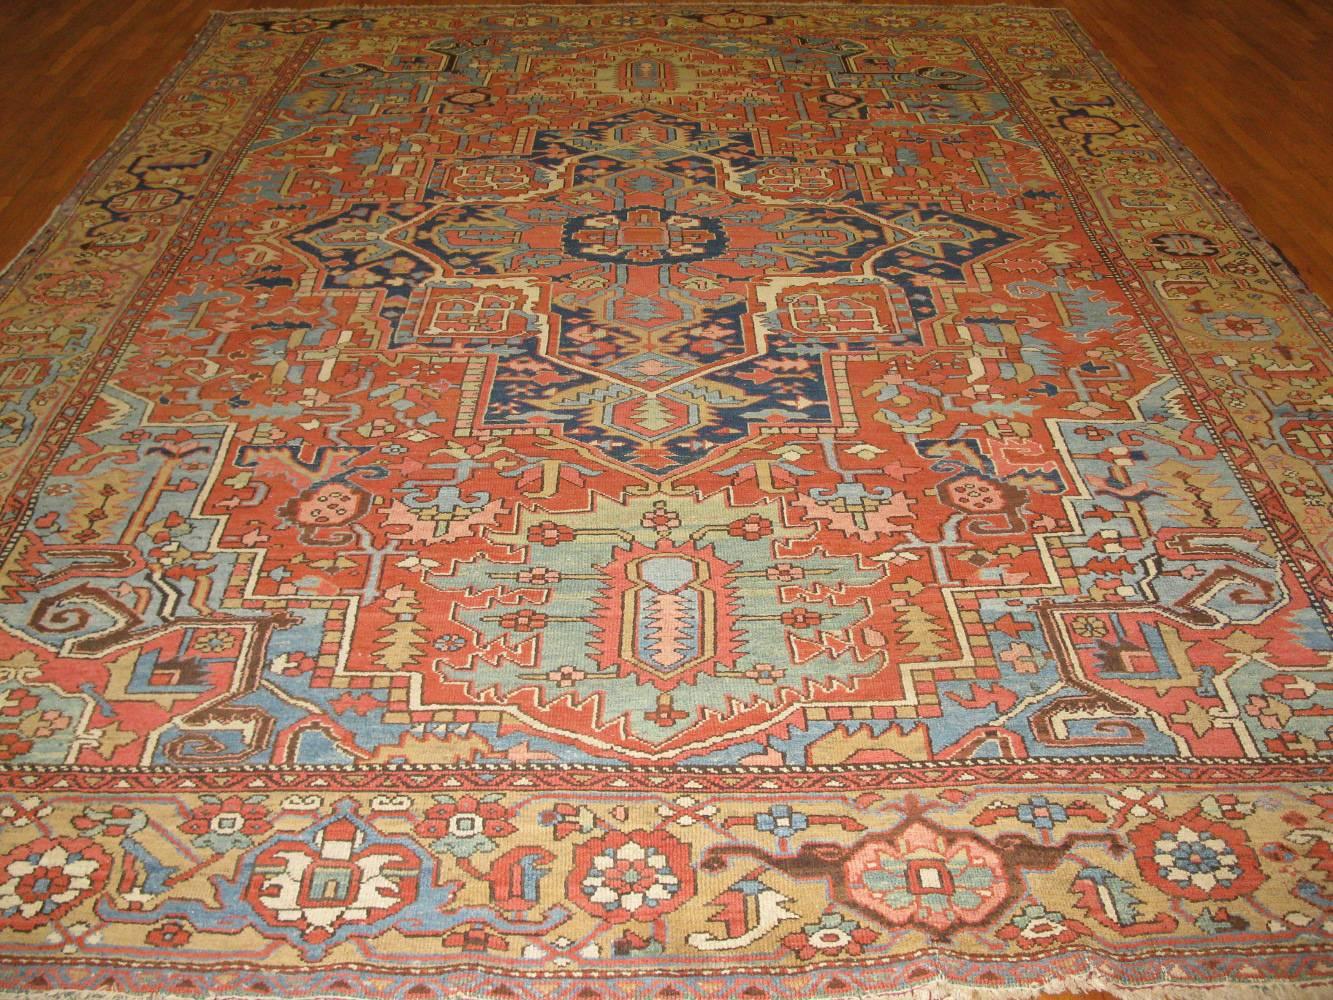 This is a fantastic antique hand-knotted Persian Heriz rug with a very fine weave made wit h wool and all natural dyes. It has a very pleasing color combination with little nave blue. The rug measures 10' x 13' 3